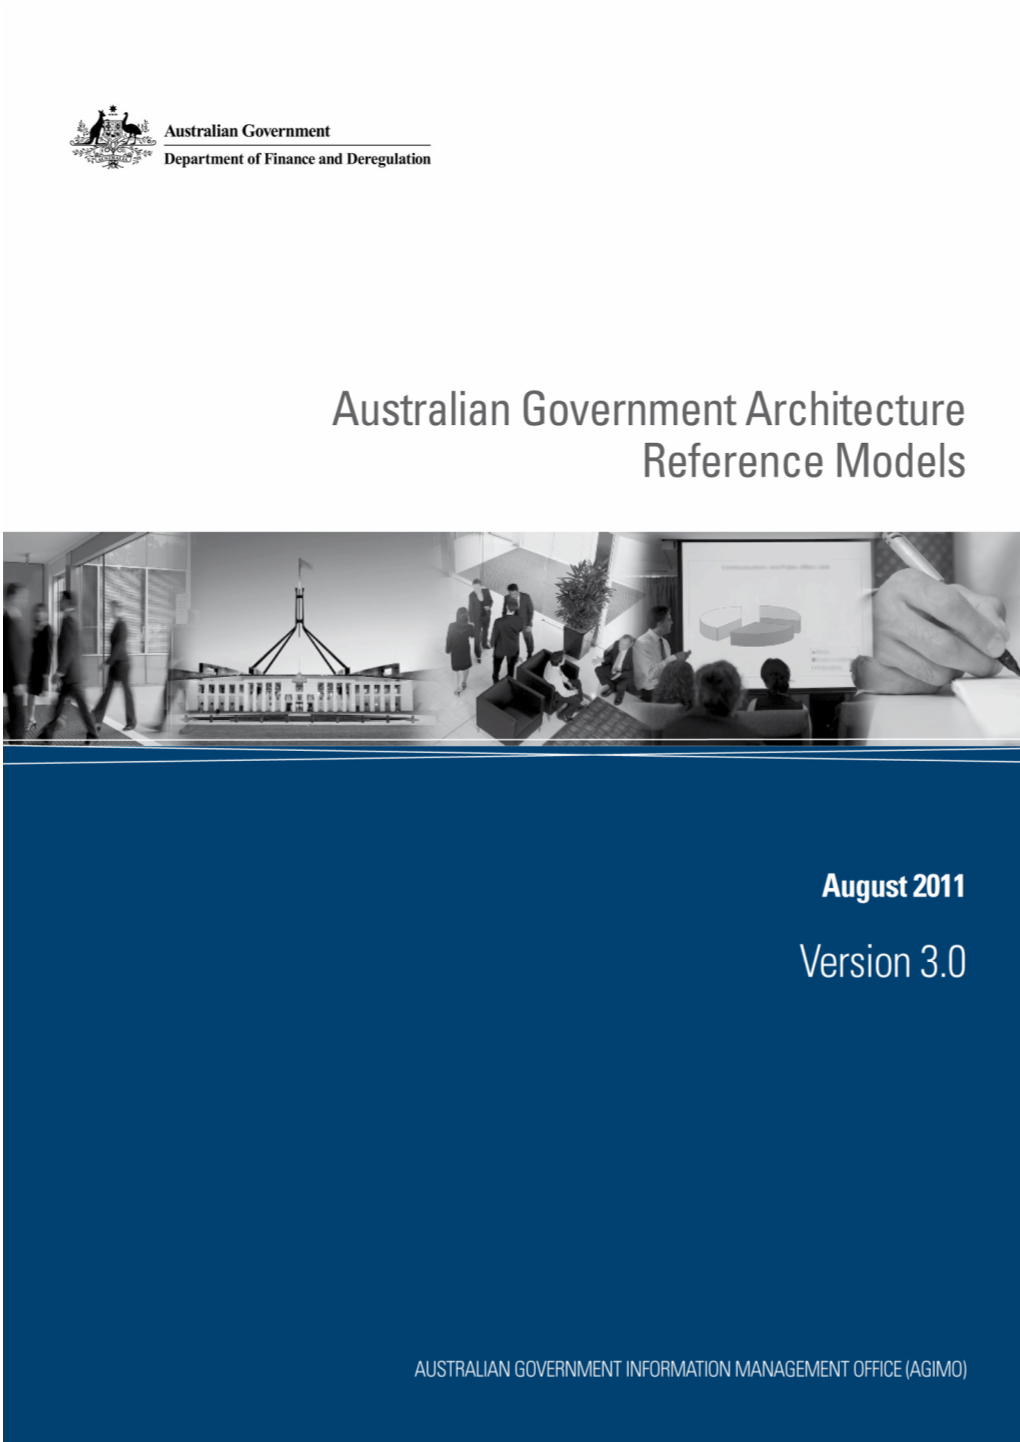 Australian Government Architecture Reference Models